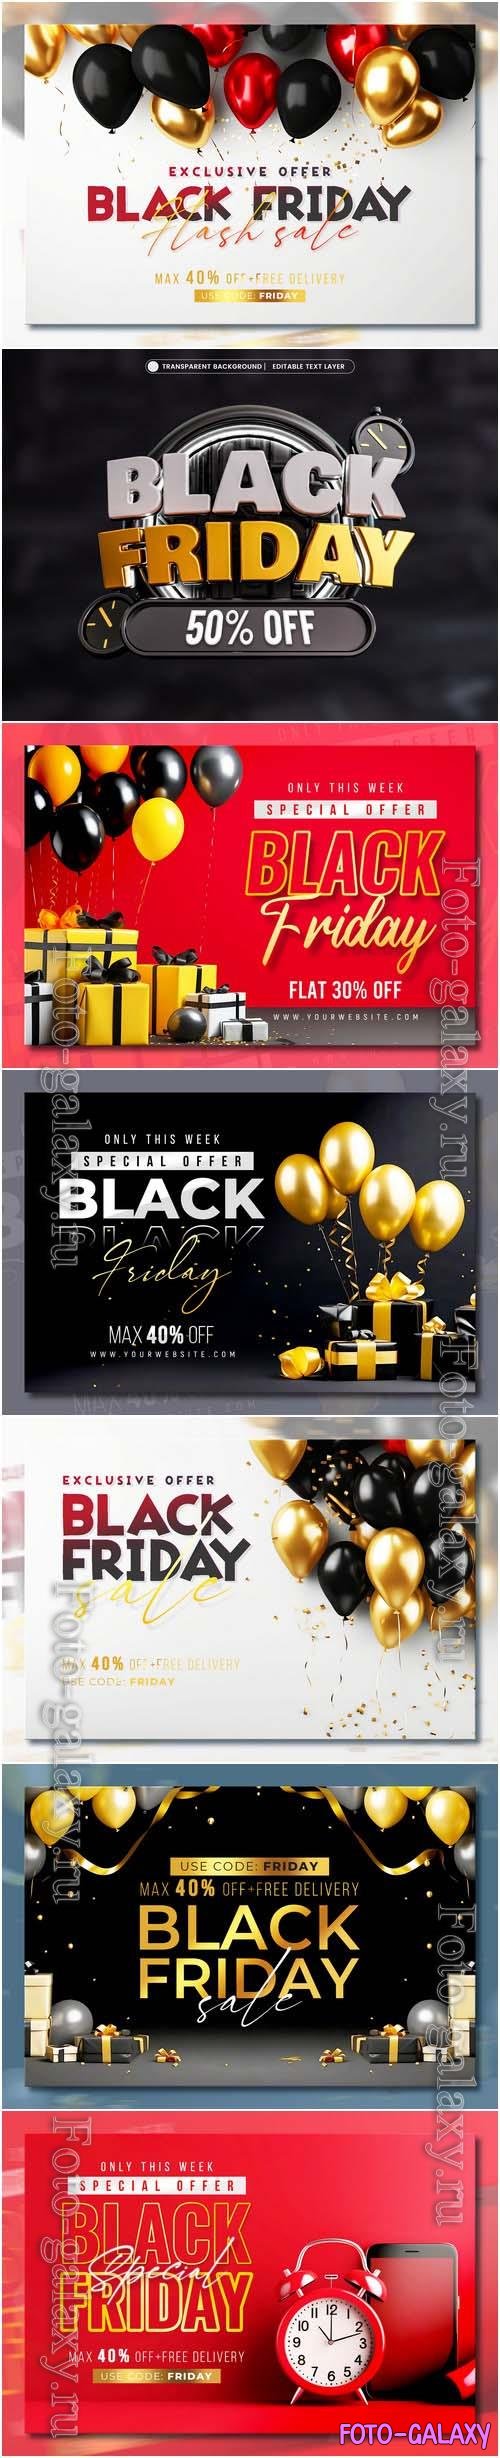 Black friday sale banner with realistic 3d gifts and balloons in psd vol 7